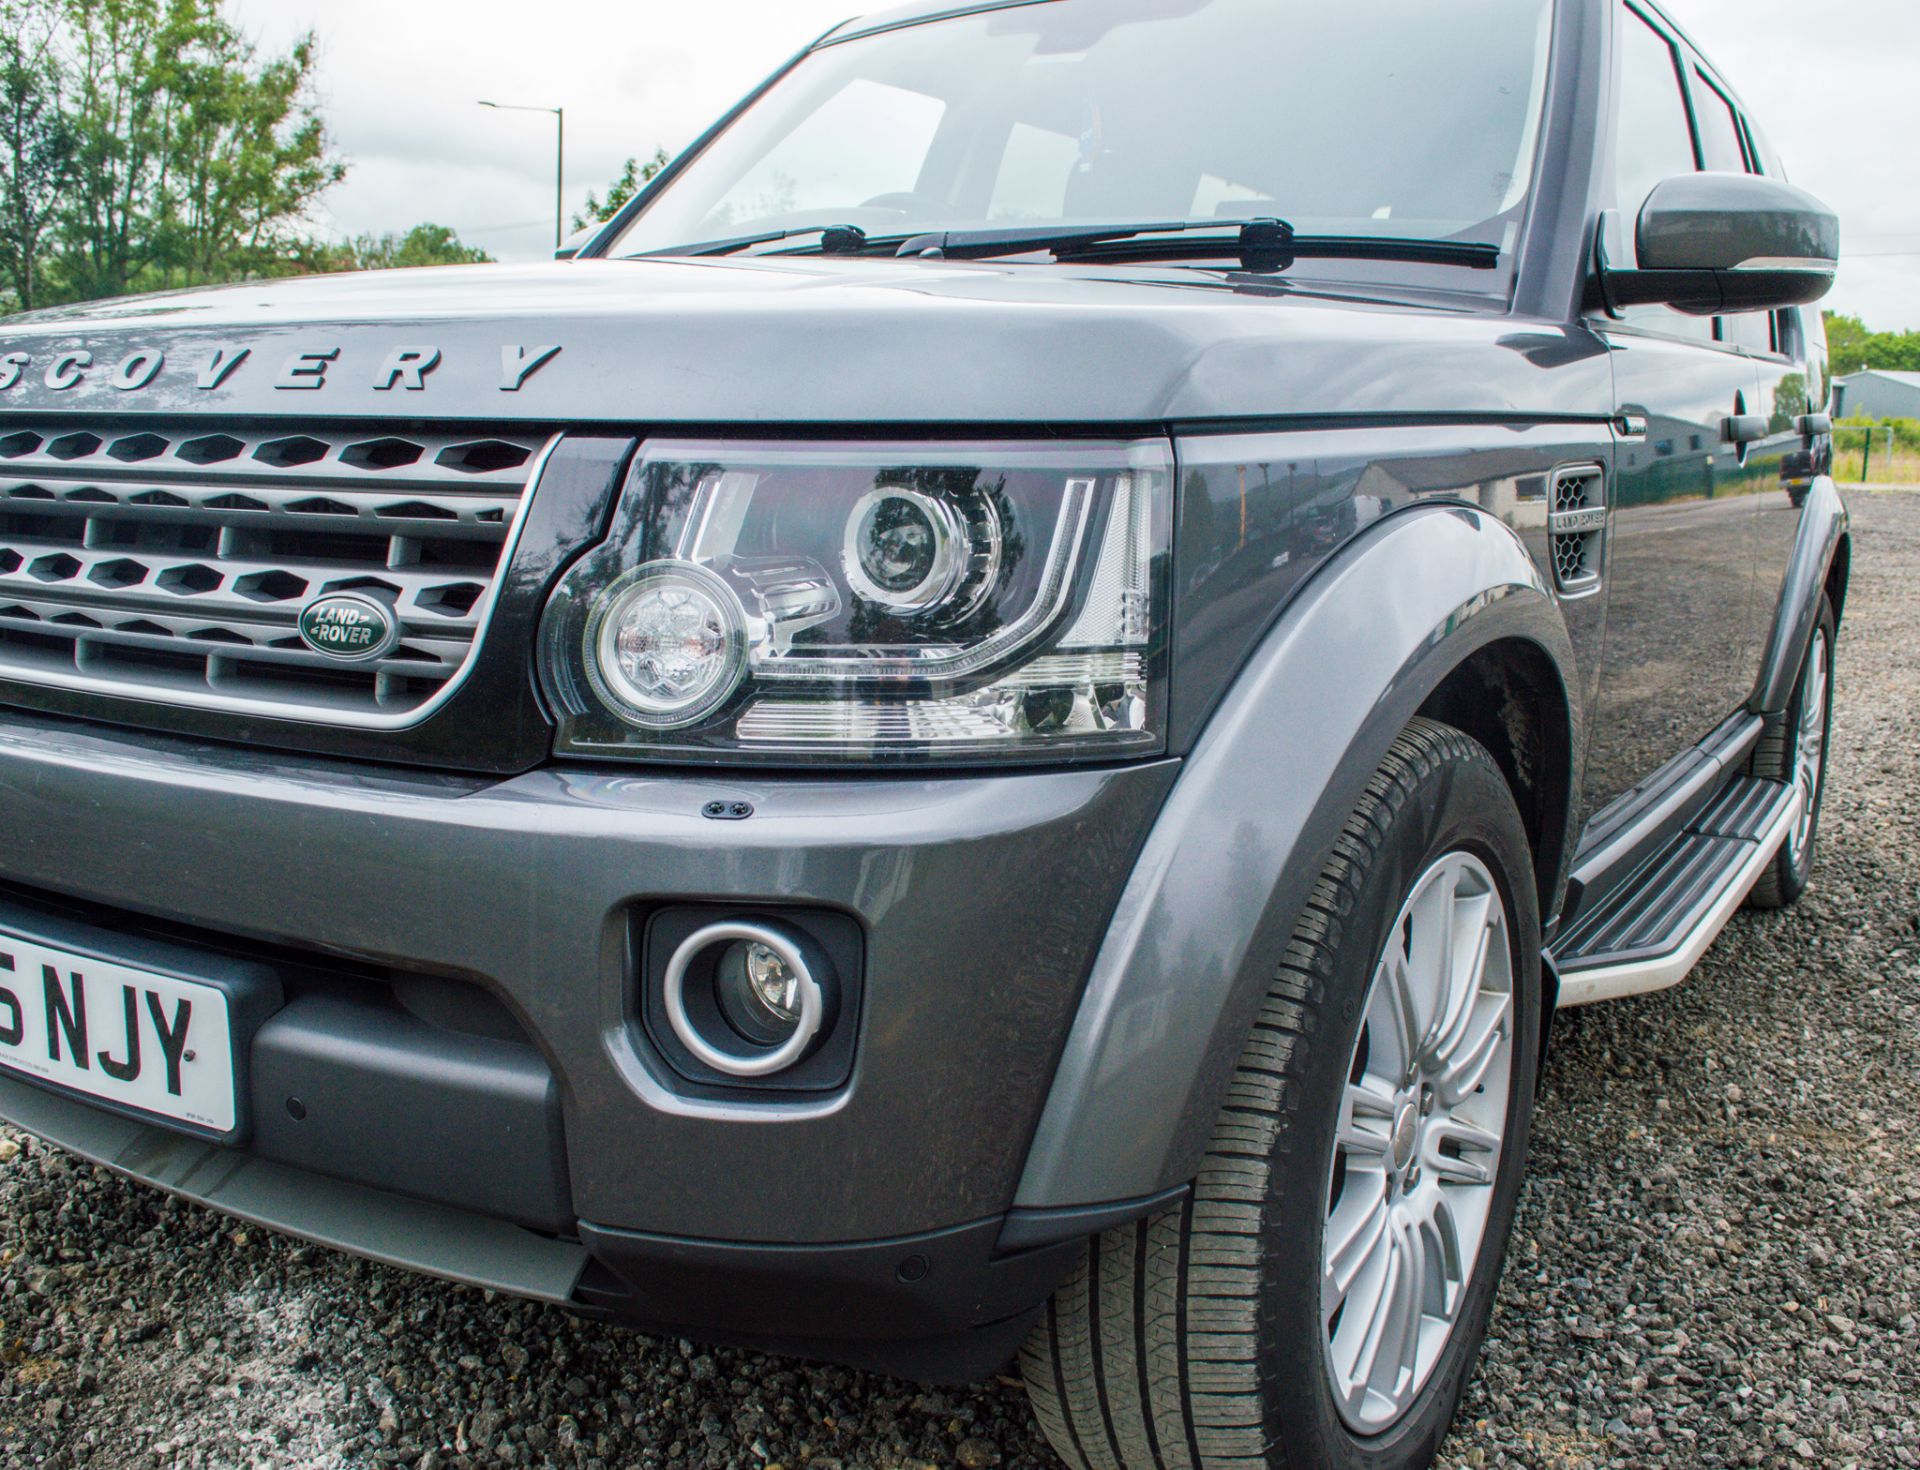 Land Rover Discovery 4 SE 3.0 TDV6 Commercial 4 wheel drive utility vehicle  Reg No: PE 65 NJY  Date - Image 14 of 23